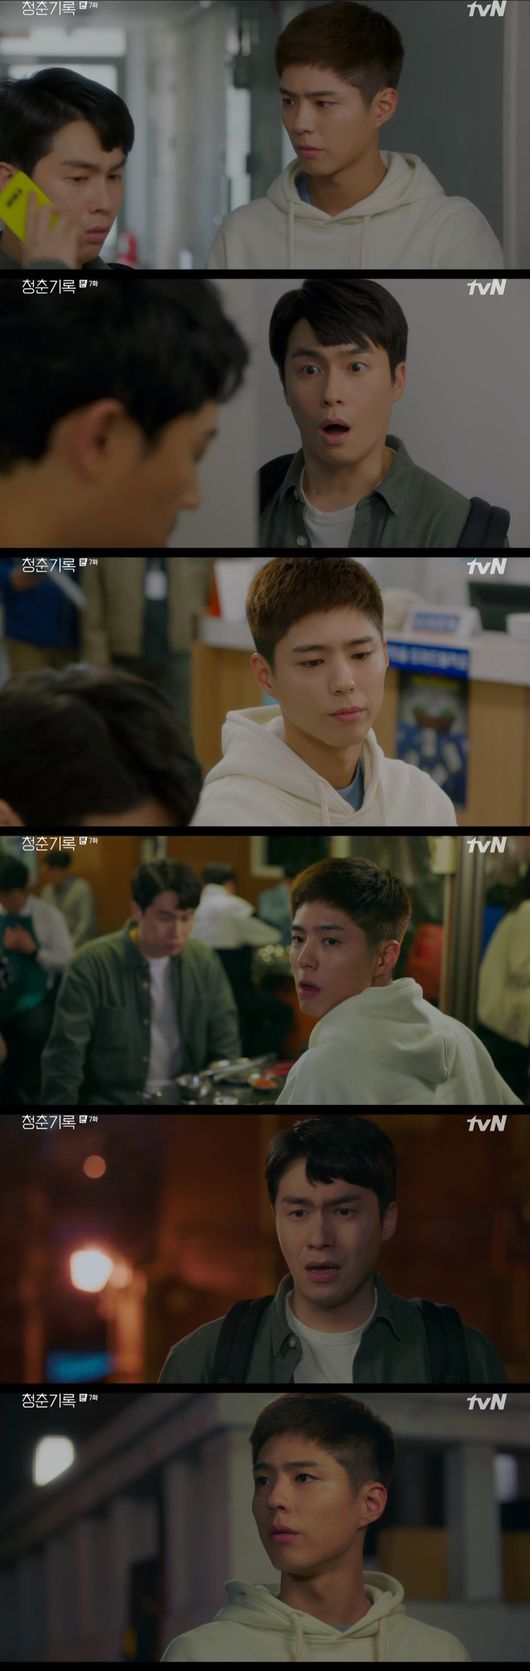 Park Bo-gum appeared in a medical drama and listened to the house theater.Earlier, Sa Hye-joon helped his brother Sa Kyung-joon (Lee Jae-won) move, and Han Ae-sook (Ha Hee-ra), who opposed Sa Kyung-juns independence, also sincerely supported his sons start.Sae Kyung-joon and Sae Hye-joon moved into a new house, but there were already other tenants in the new house and the tenant said, Records of the Grand Historian.Its already the fifth time today, said Sa Kyung-jun, who called a real estate agent. But the real estate agent did not answer.Sa Kyung-joon was hit by one-room rental records of the Grand Historian. Sa Kyung-joon was shocked and said, I can not go.I can not get out of here until this case is revealed. So, Sa Hye-joon forced him to take him out.Sa Gyeong-jun went to the police station. As a result, Sa Gyeong-juns contract was a double contract. Sa Hye-joon asked, Can not you pay a contract?Sa Hye-joon, who left the police station, told Sa Kyung-joon, Im hungry. Ill buy you rice. Sa Hye-joon and Sa Kyung-joon headed to the house.Sa Hye-joon took Sa Gyeong-jun home. But Sa Gyeong-jun couldnt easily get into the house.Even if I got a job that I envy, I would like to live alone with my eldest sons obligations, said Sa Kyung-joon. I wanted to throw all the things I wanted to do.But do you feed me this big shit? When he returned, both Lingnan and Han Ae-suk were stunned. There is one officetel, but the broker said that he was paid by several tenants.So, Lingnan said, How does Kyung Jun get the Records of the Grand Historian? So, Sa Hye-joon said, My brother did not do anything wrong.Lingnan sided with Sa Kyung-jun, who saw it, said, I think my father should make peace with me.So Lingnan blamed his father, Samingi, saying, I hit him because of someone.Han Ae-sook said, Today, Kyung-joon is the biggest Record of Youth Grand Historian, so lets talk about this.On the other hand, Sa Hye-joon started his acting as he was cast in the medical drama Gateway. Sa Hye-joon worked with the famous actor Yeon Su Lee.Yeon Su Lee genuinely cheered on Sa Hye-joon, who is trying alone, and told Sa Hye-joon, Call him a sister.Sa Hye-joon made an act and threw an ambassador to Yeon Su Lee, I want to make a sister, and finally made the house theater a heartbreaking and finally predicted the flower path of Acting.: TVN Record of Youth broadcast capture